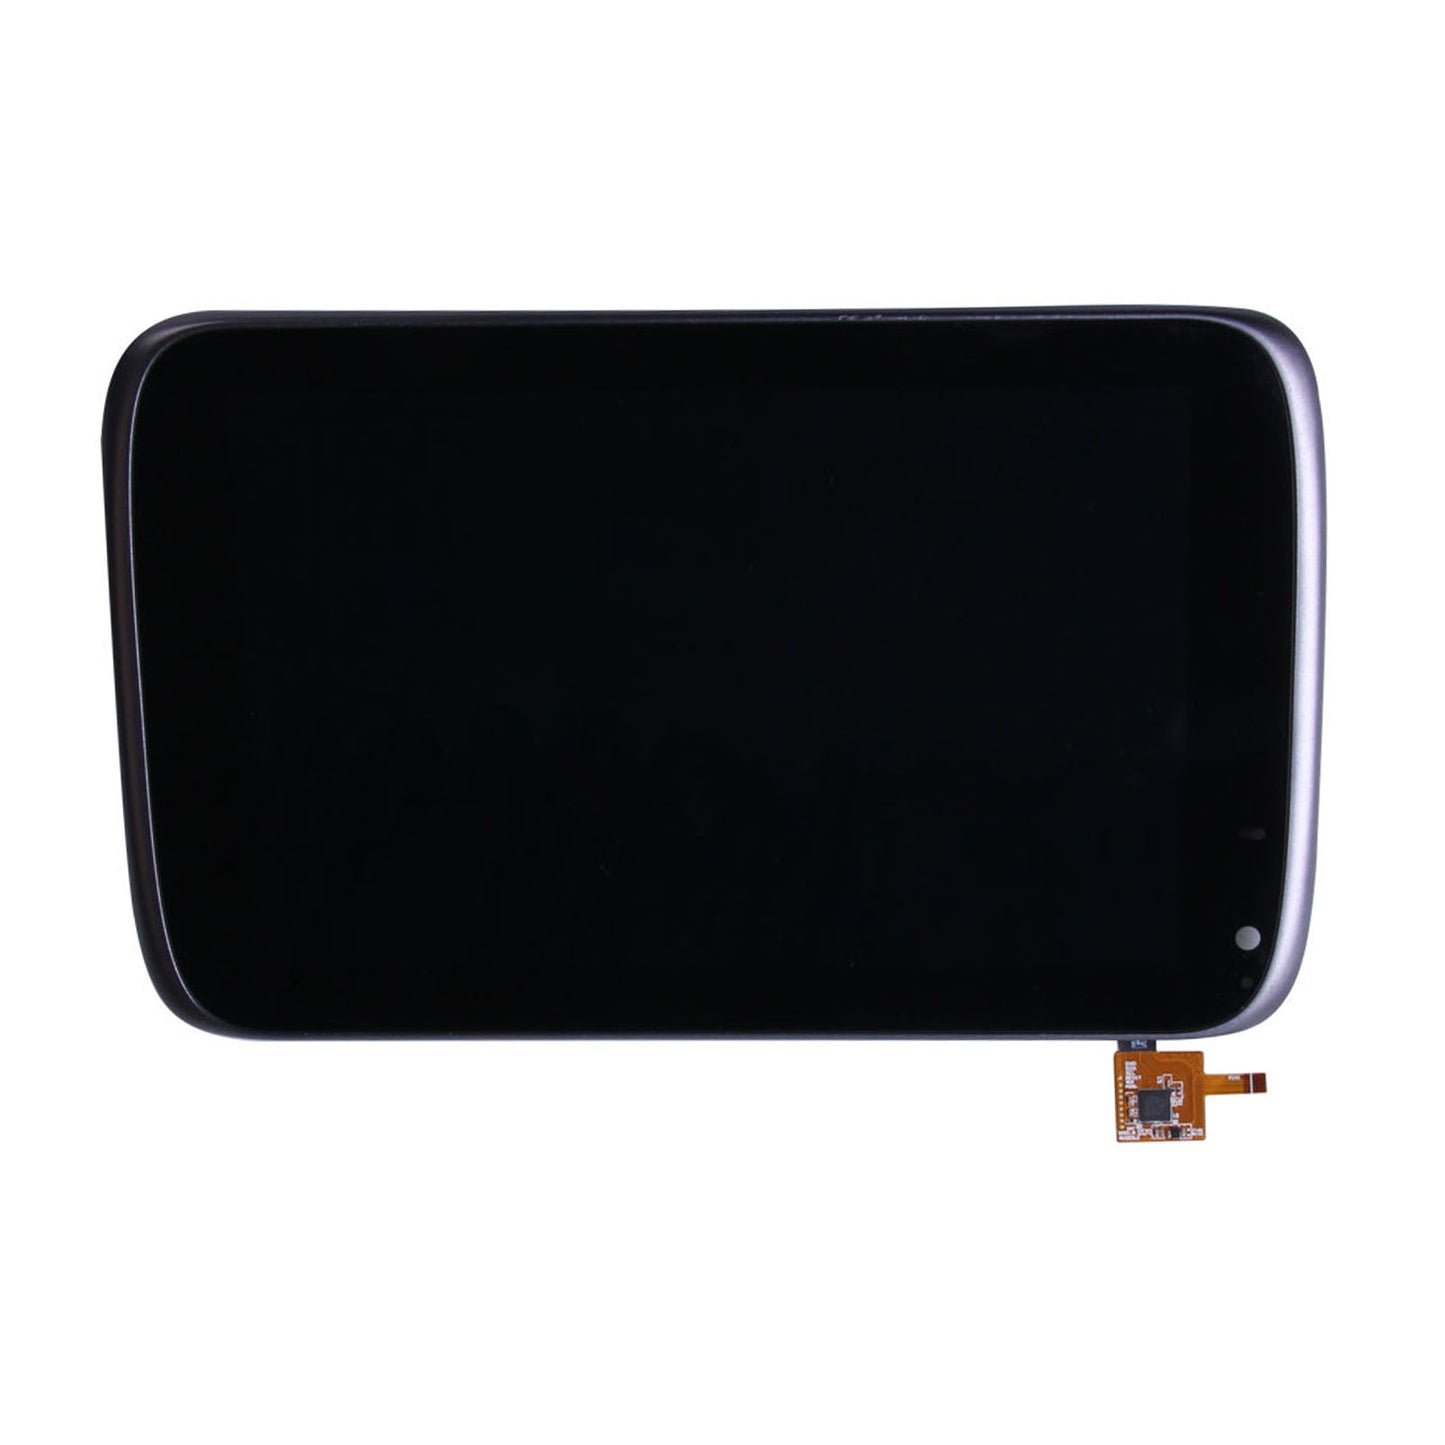 7.0-inch IPS display kit with a 1280x800 resolution